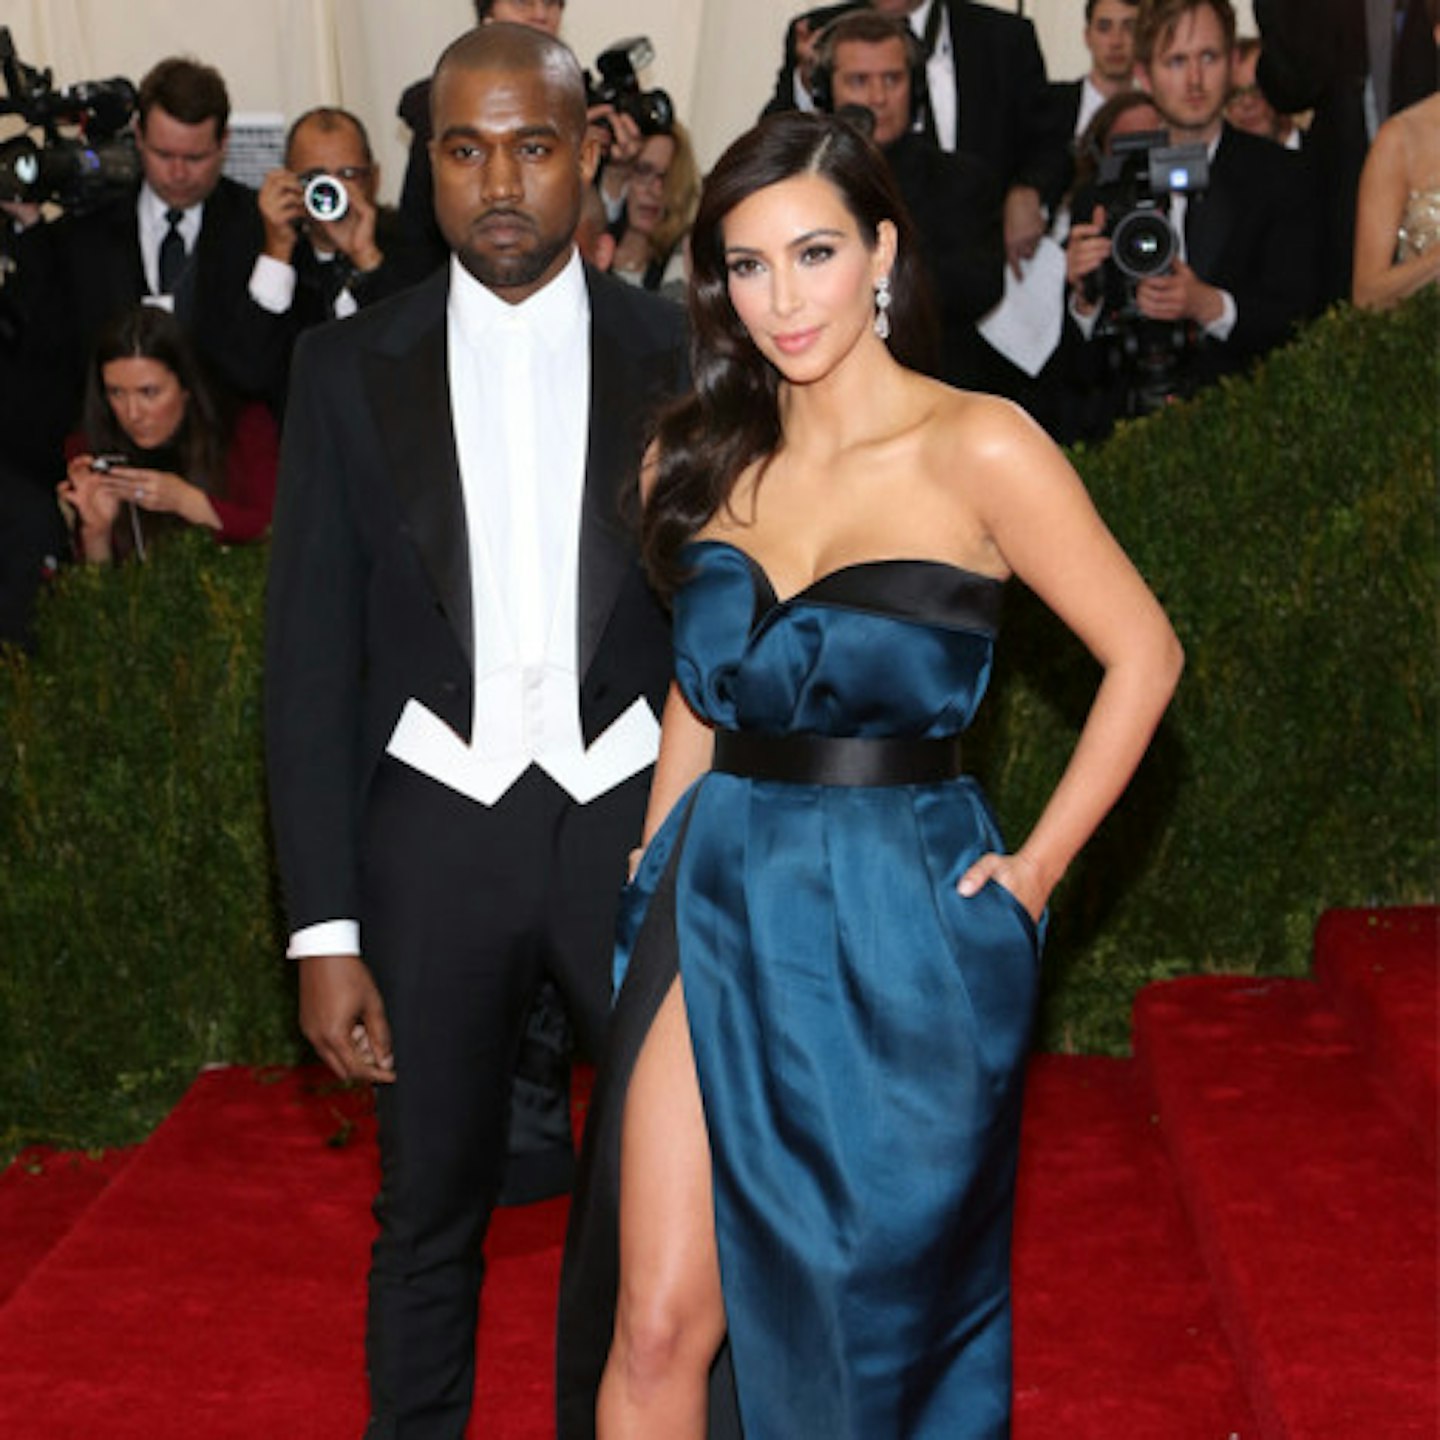 Kim will reportedly make over $20 million from her latest wedding